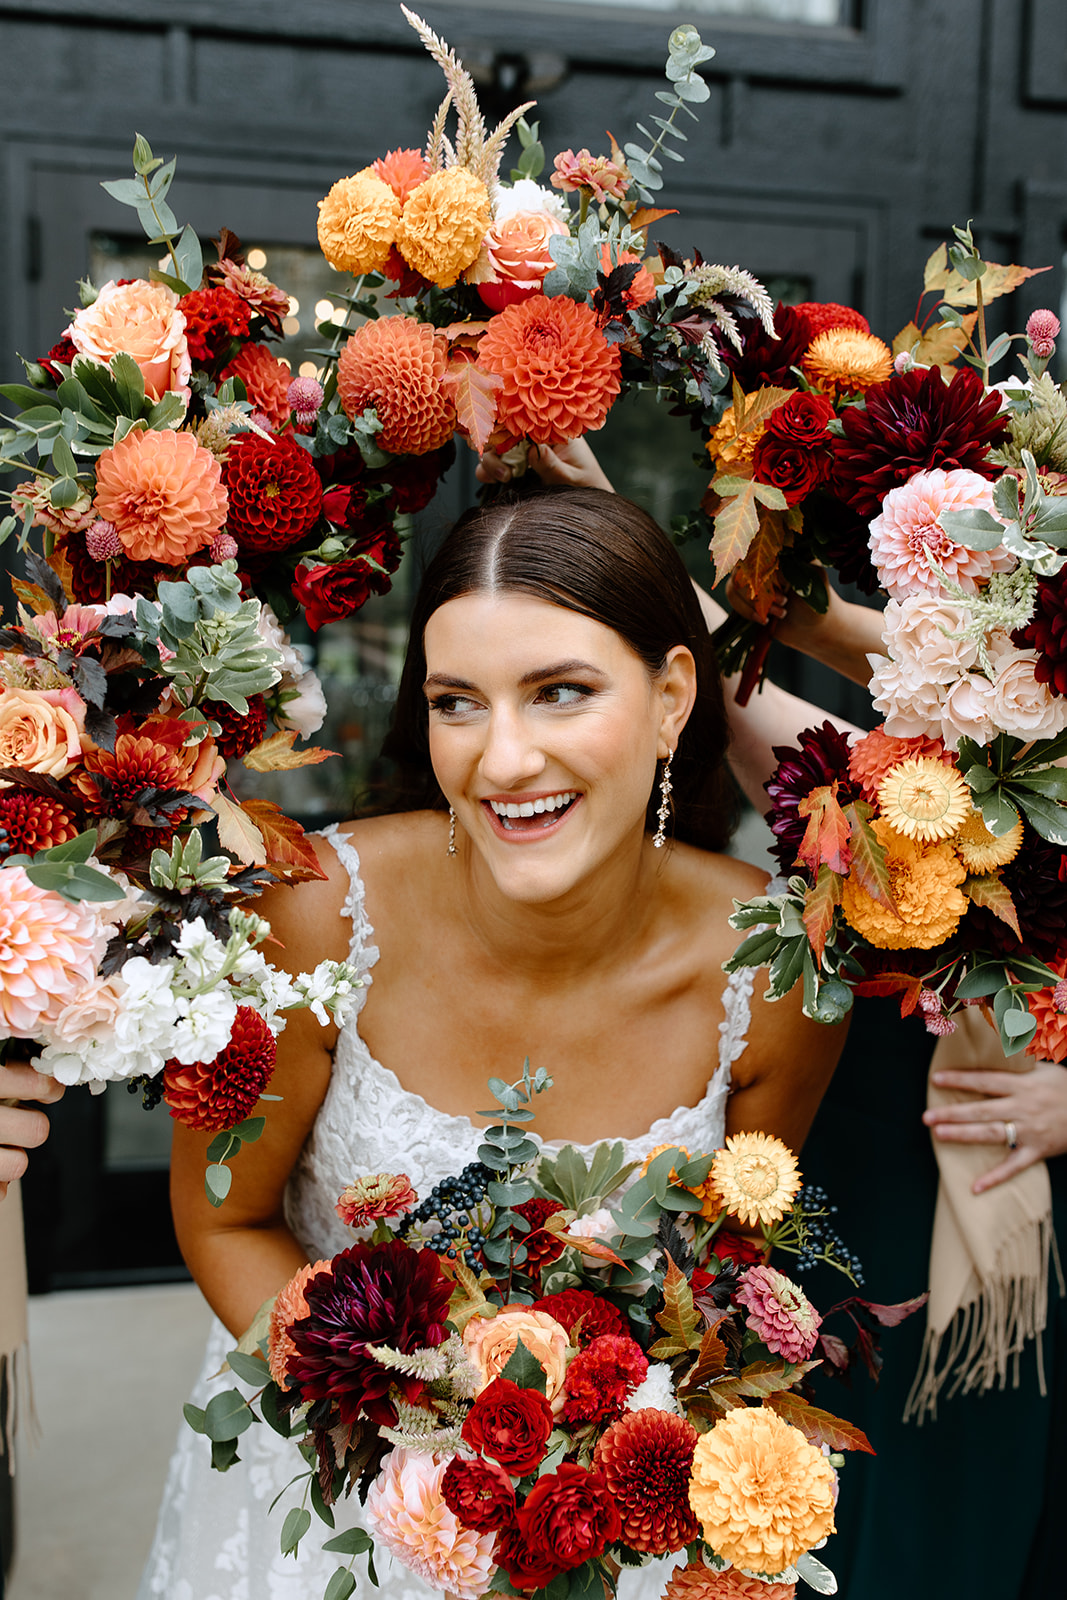 Bride surrounded by bouquets